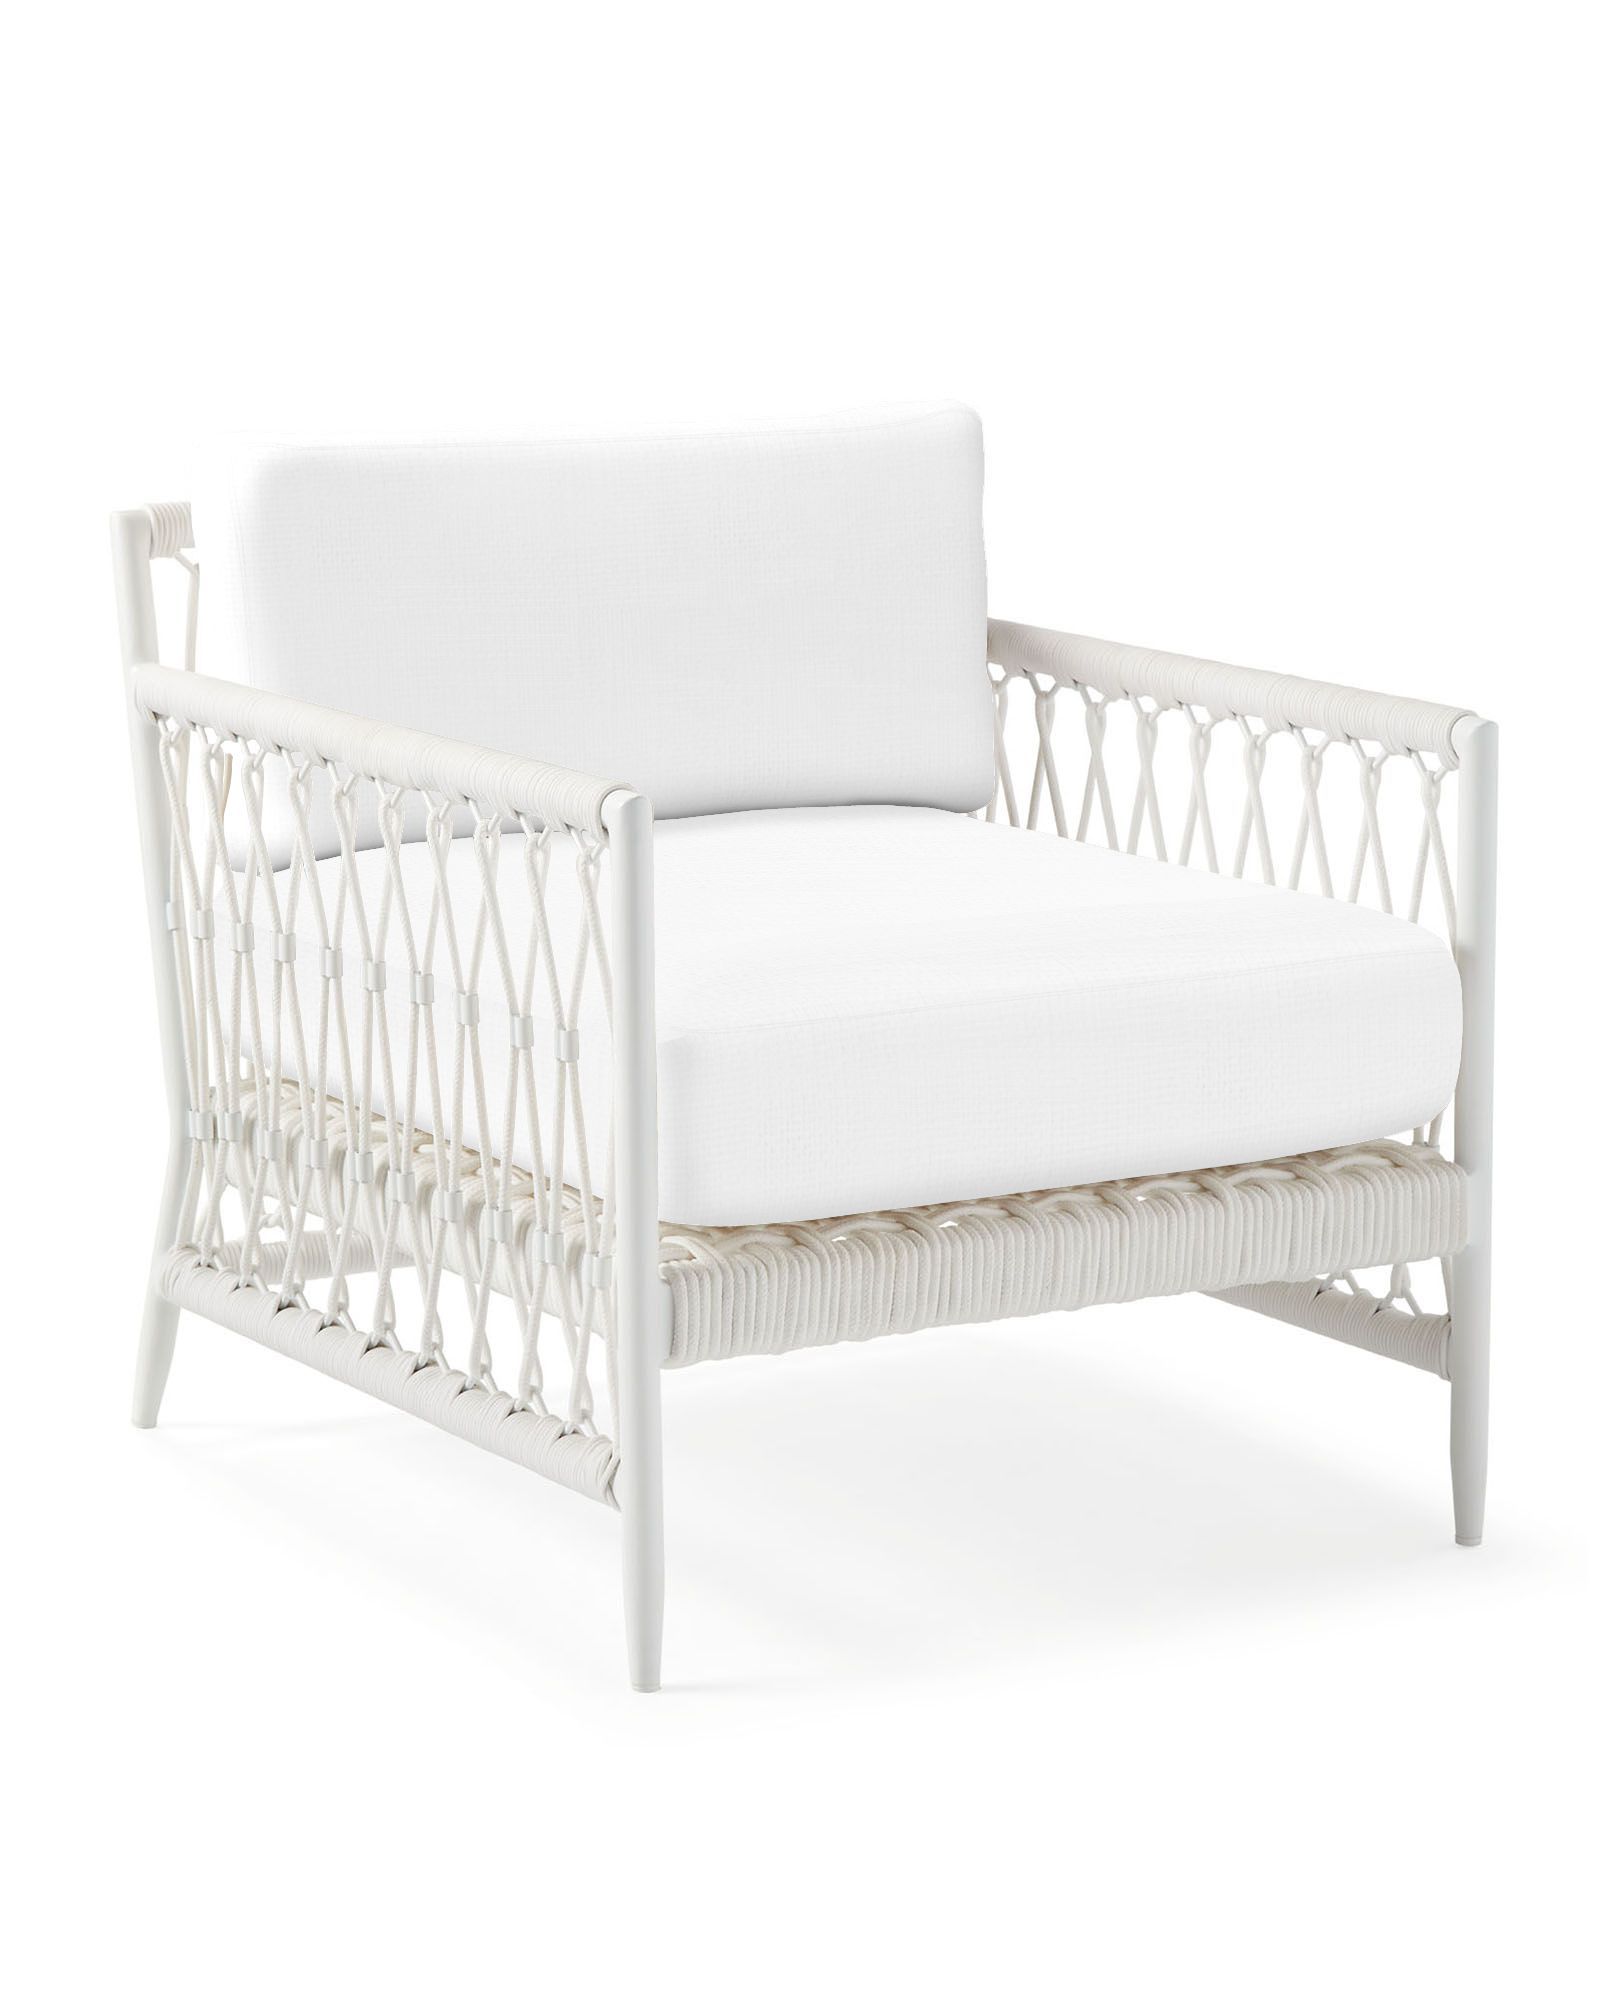 Salt Creek Lounge Chair - White | Serena and Lily